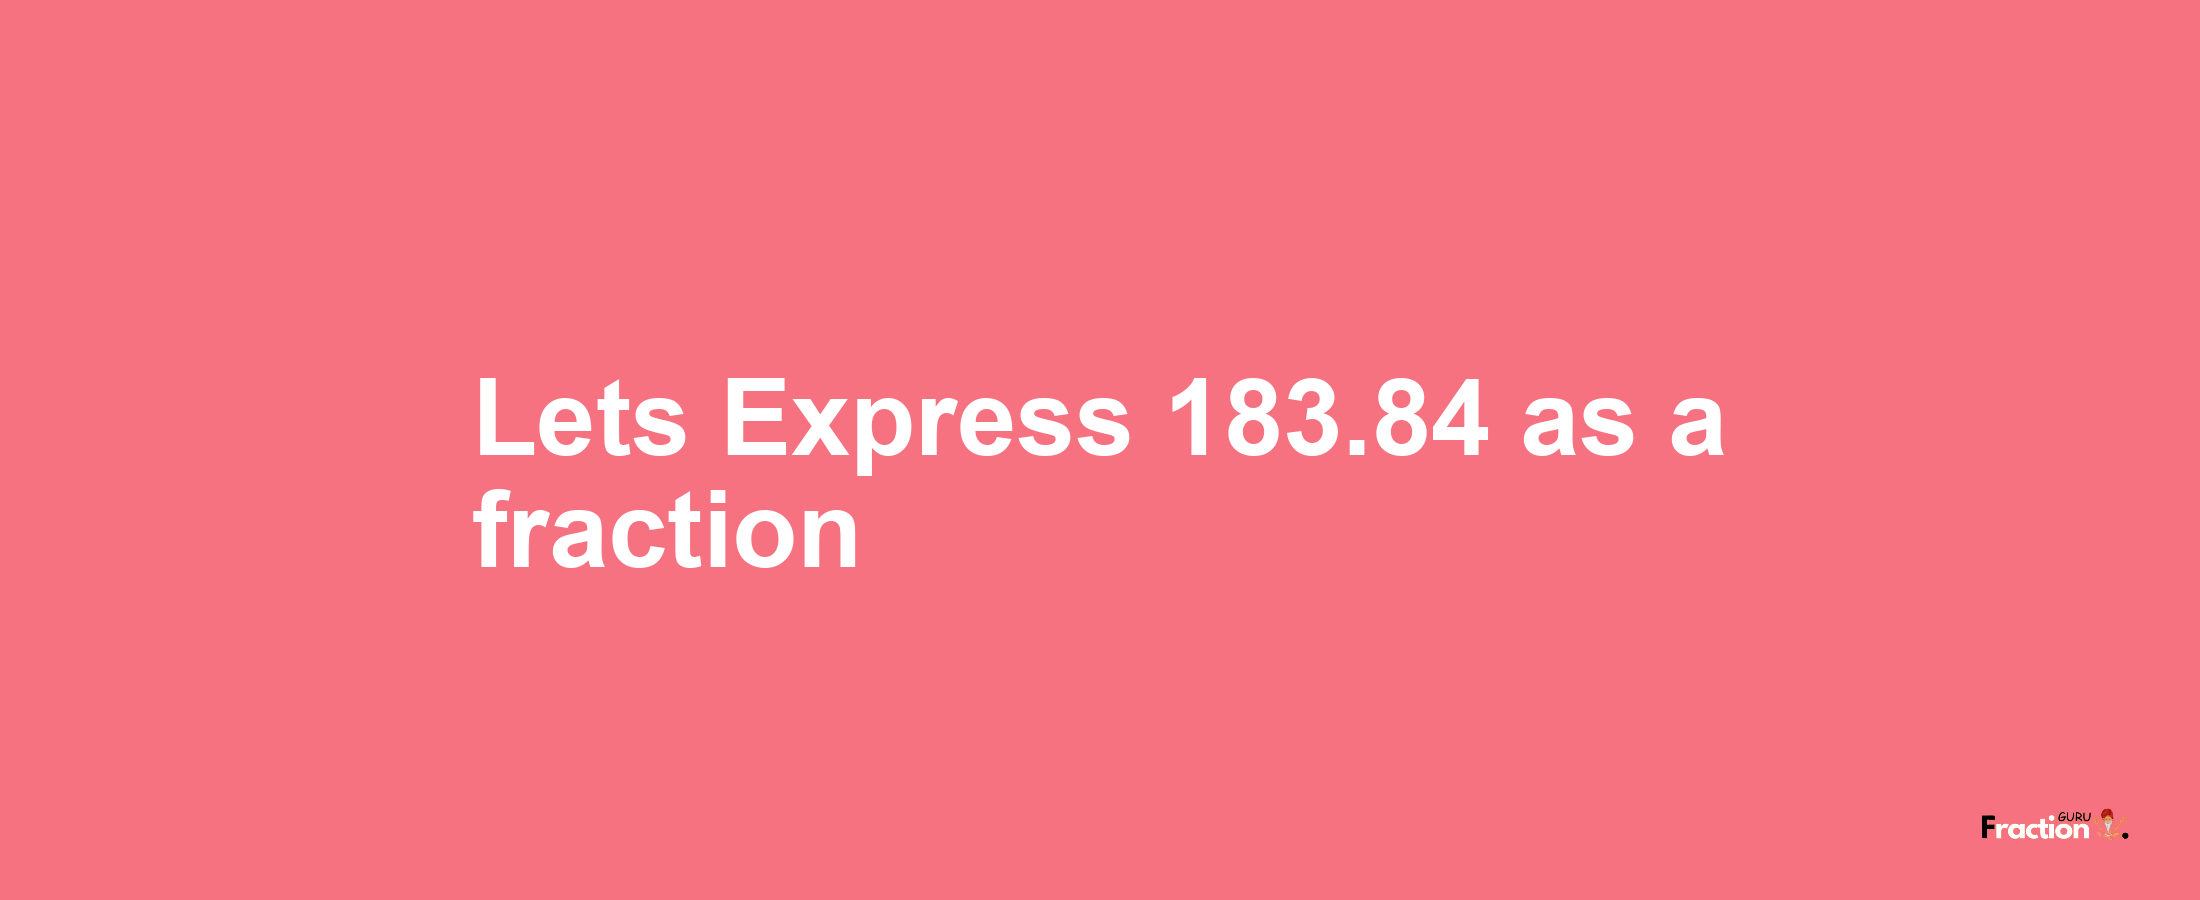 Lets Express 183.84 as afraction